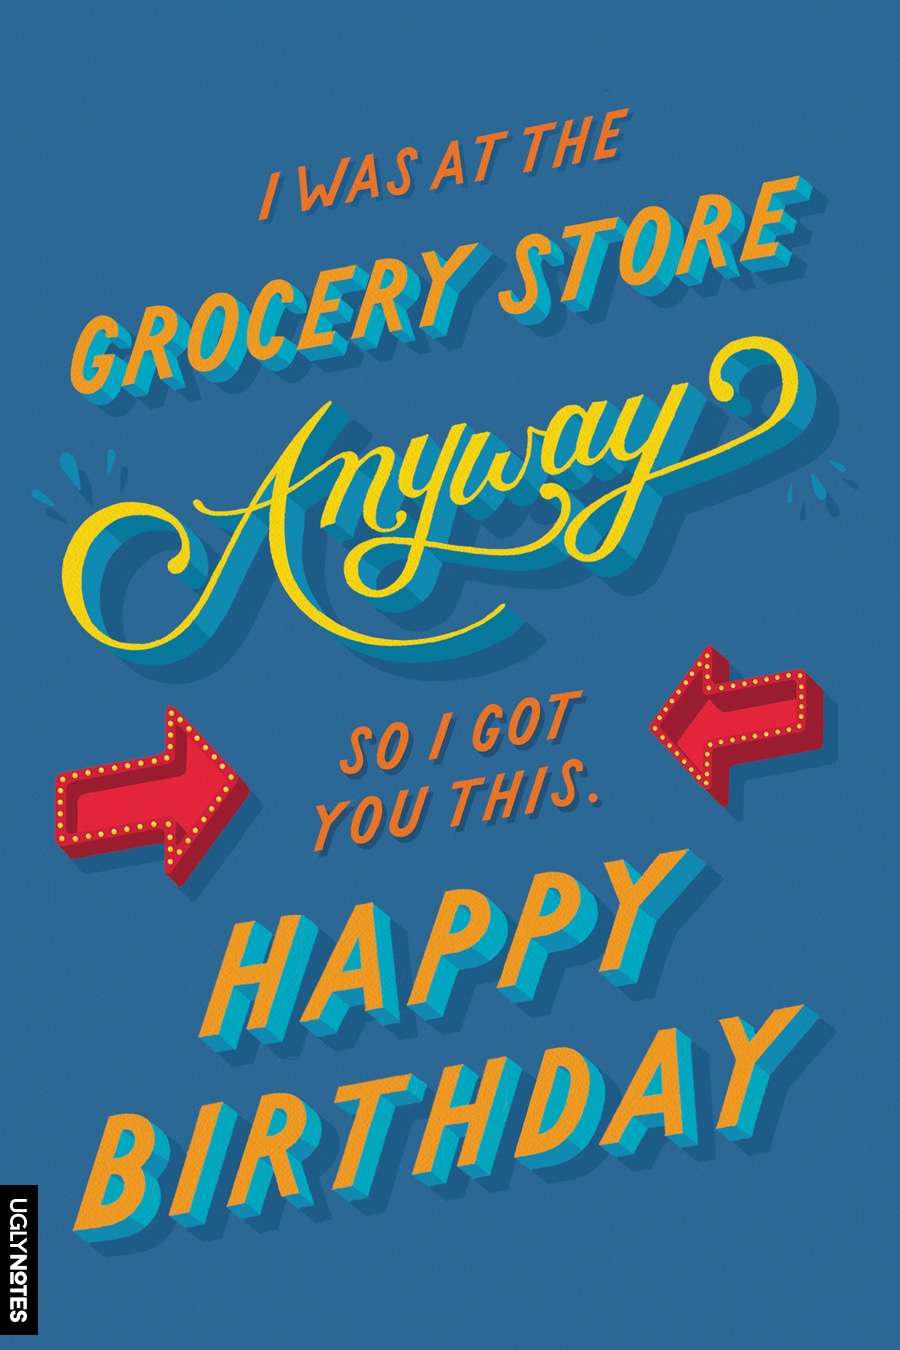 I was at the grocery store anyway, so I got you this. Happy birthday.